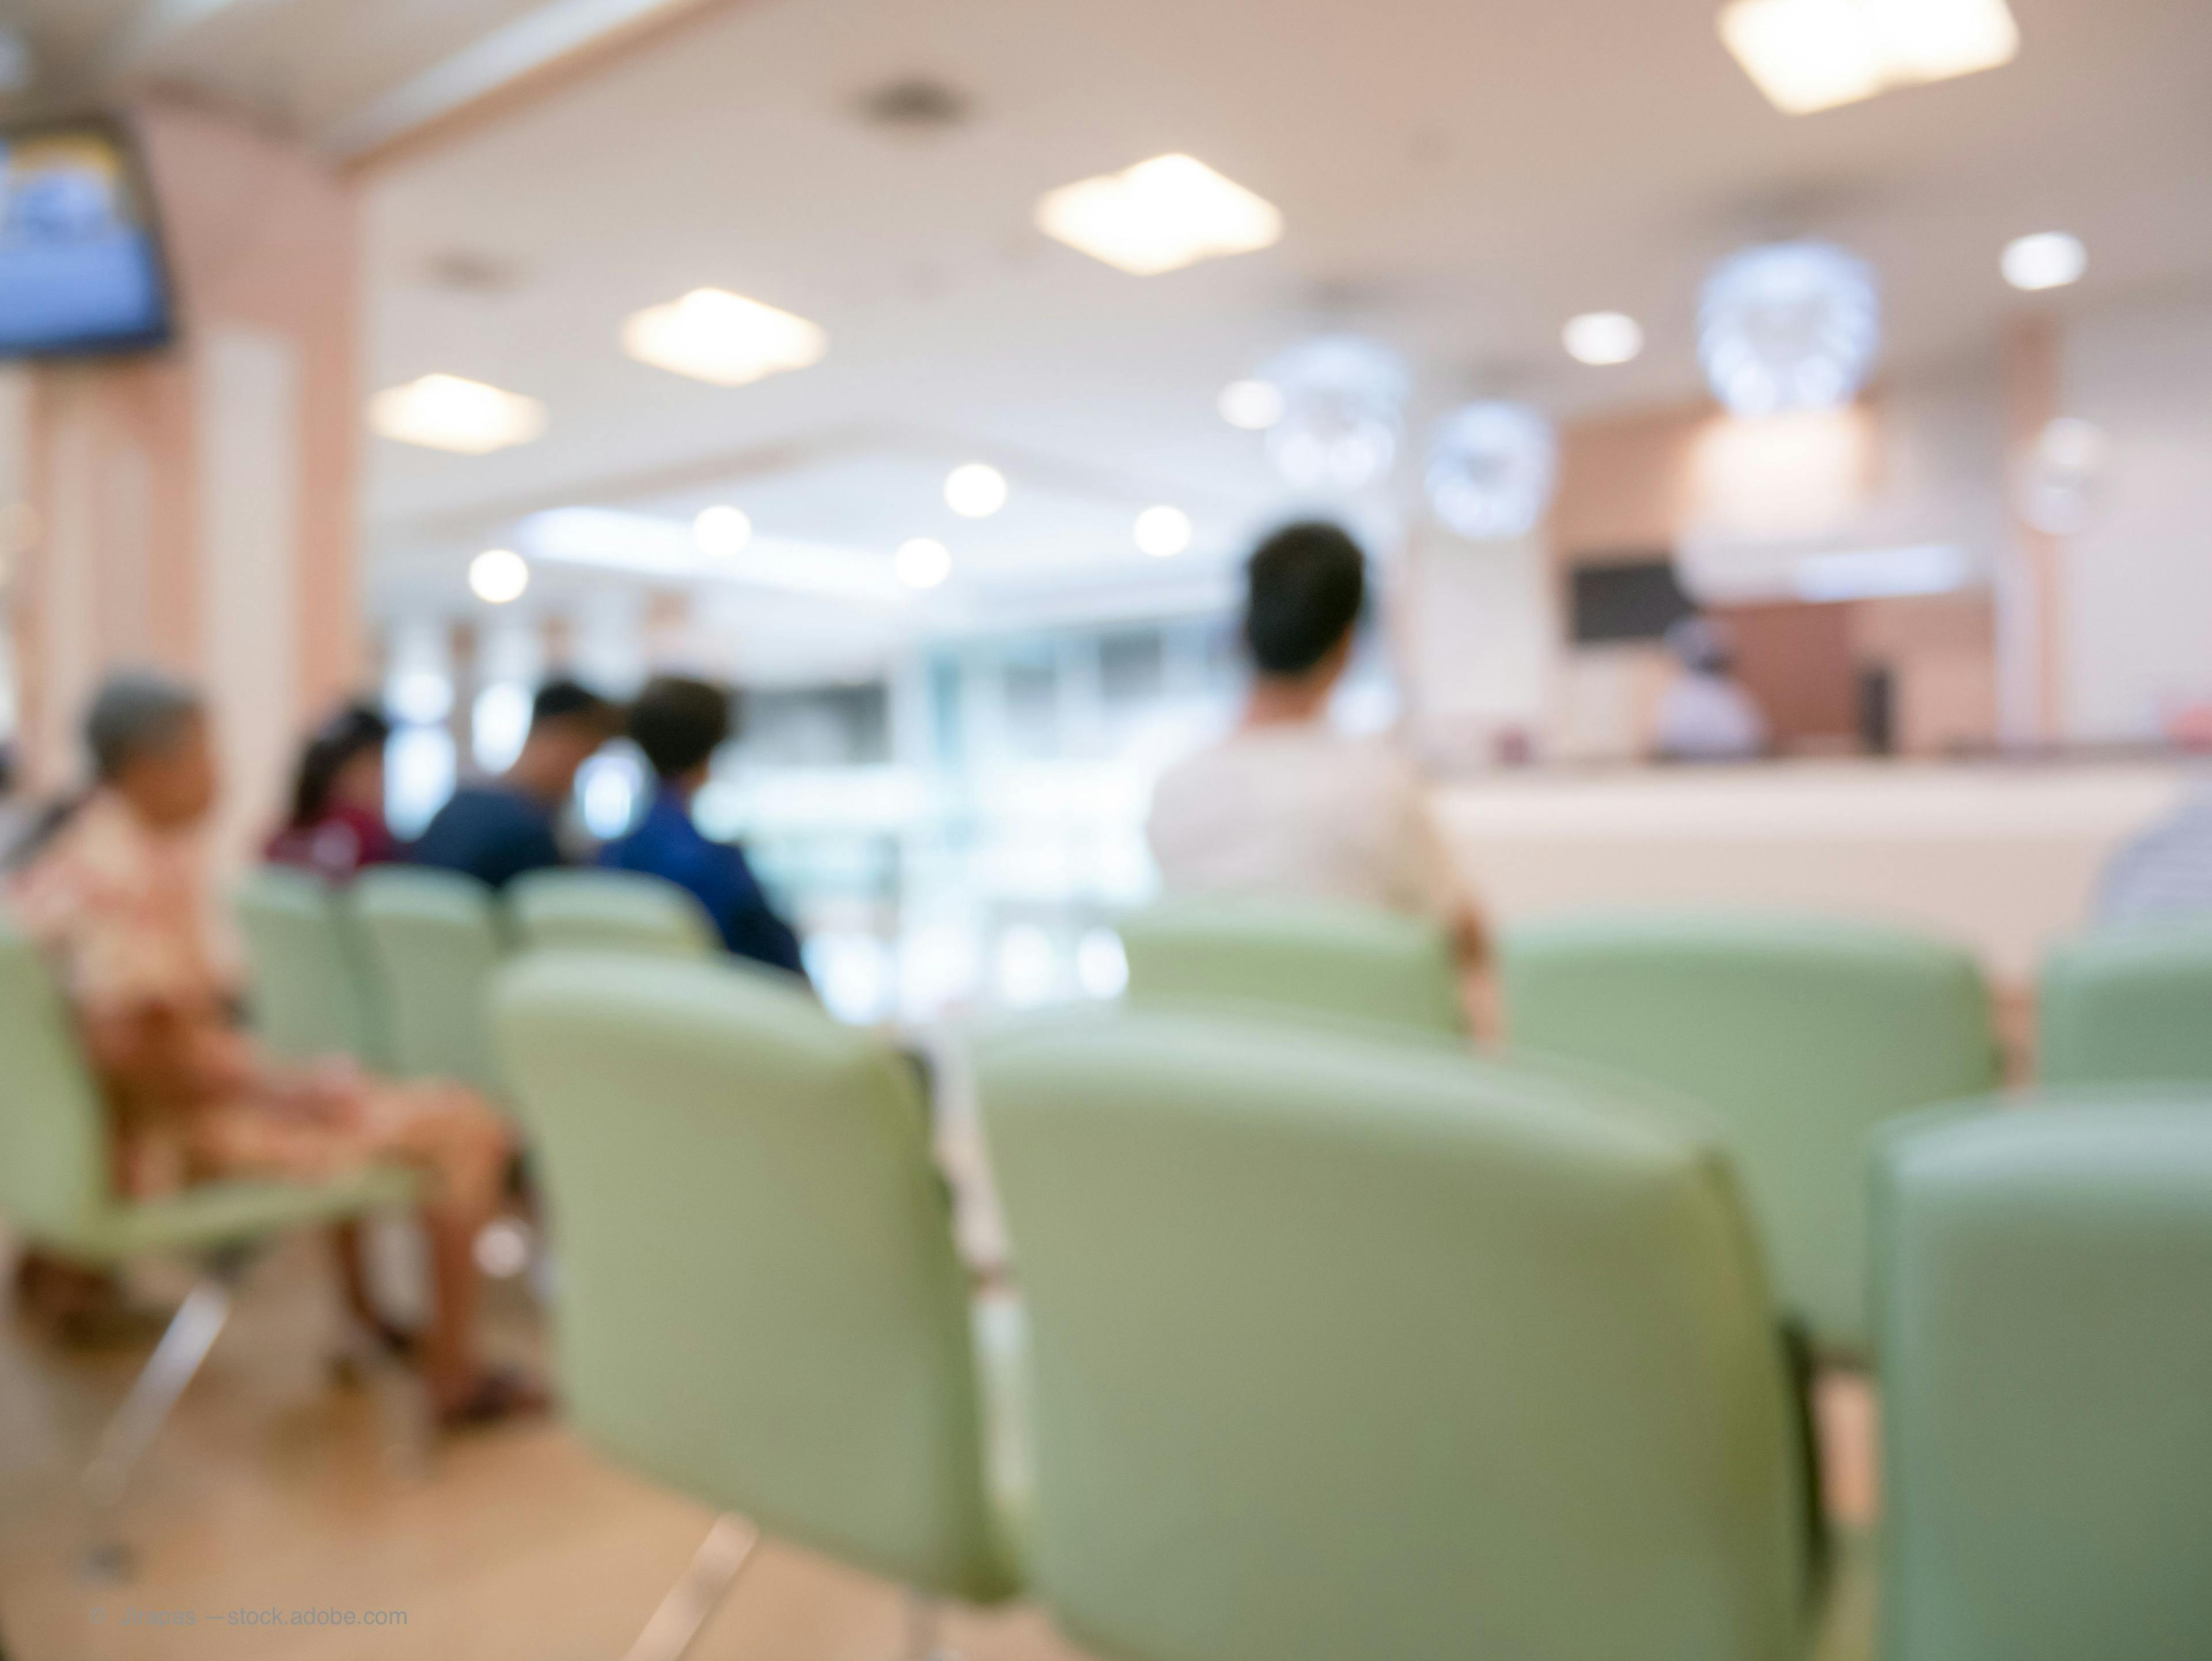 According to McKinsey’s Hospital Insights Survey, hospital outpatient and procedural volumes were nearly 4 percent higher in July compared to 2019, but ophthalmology was down during the same period. 